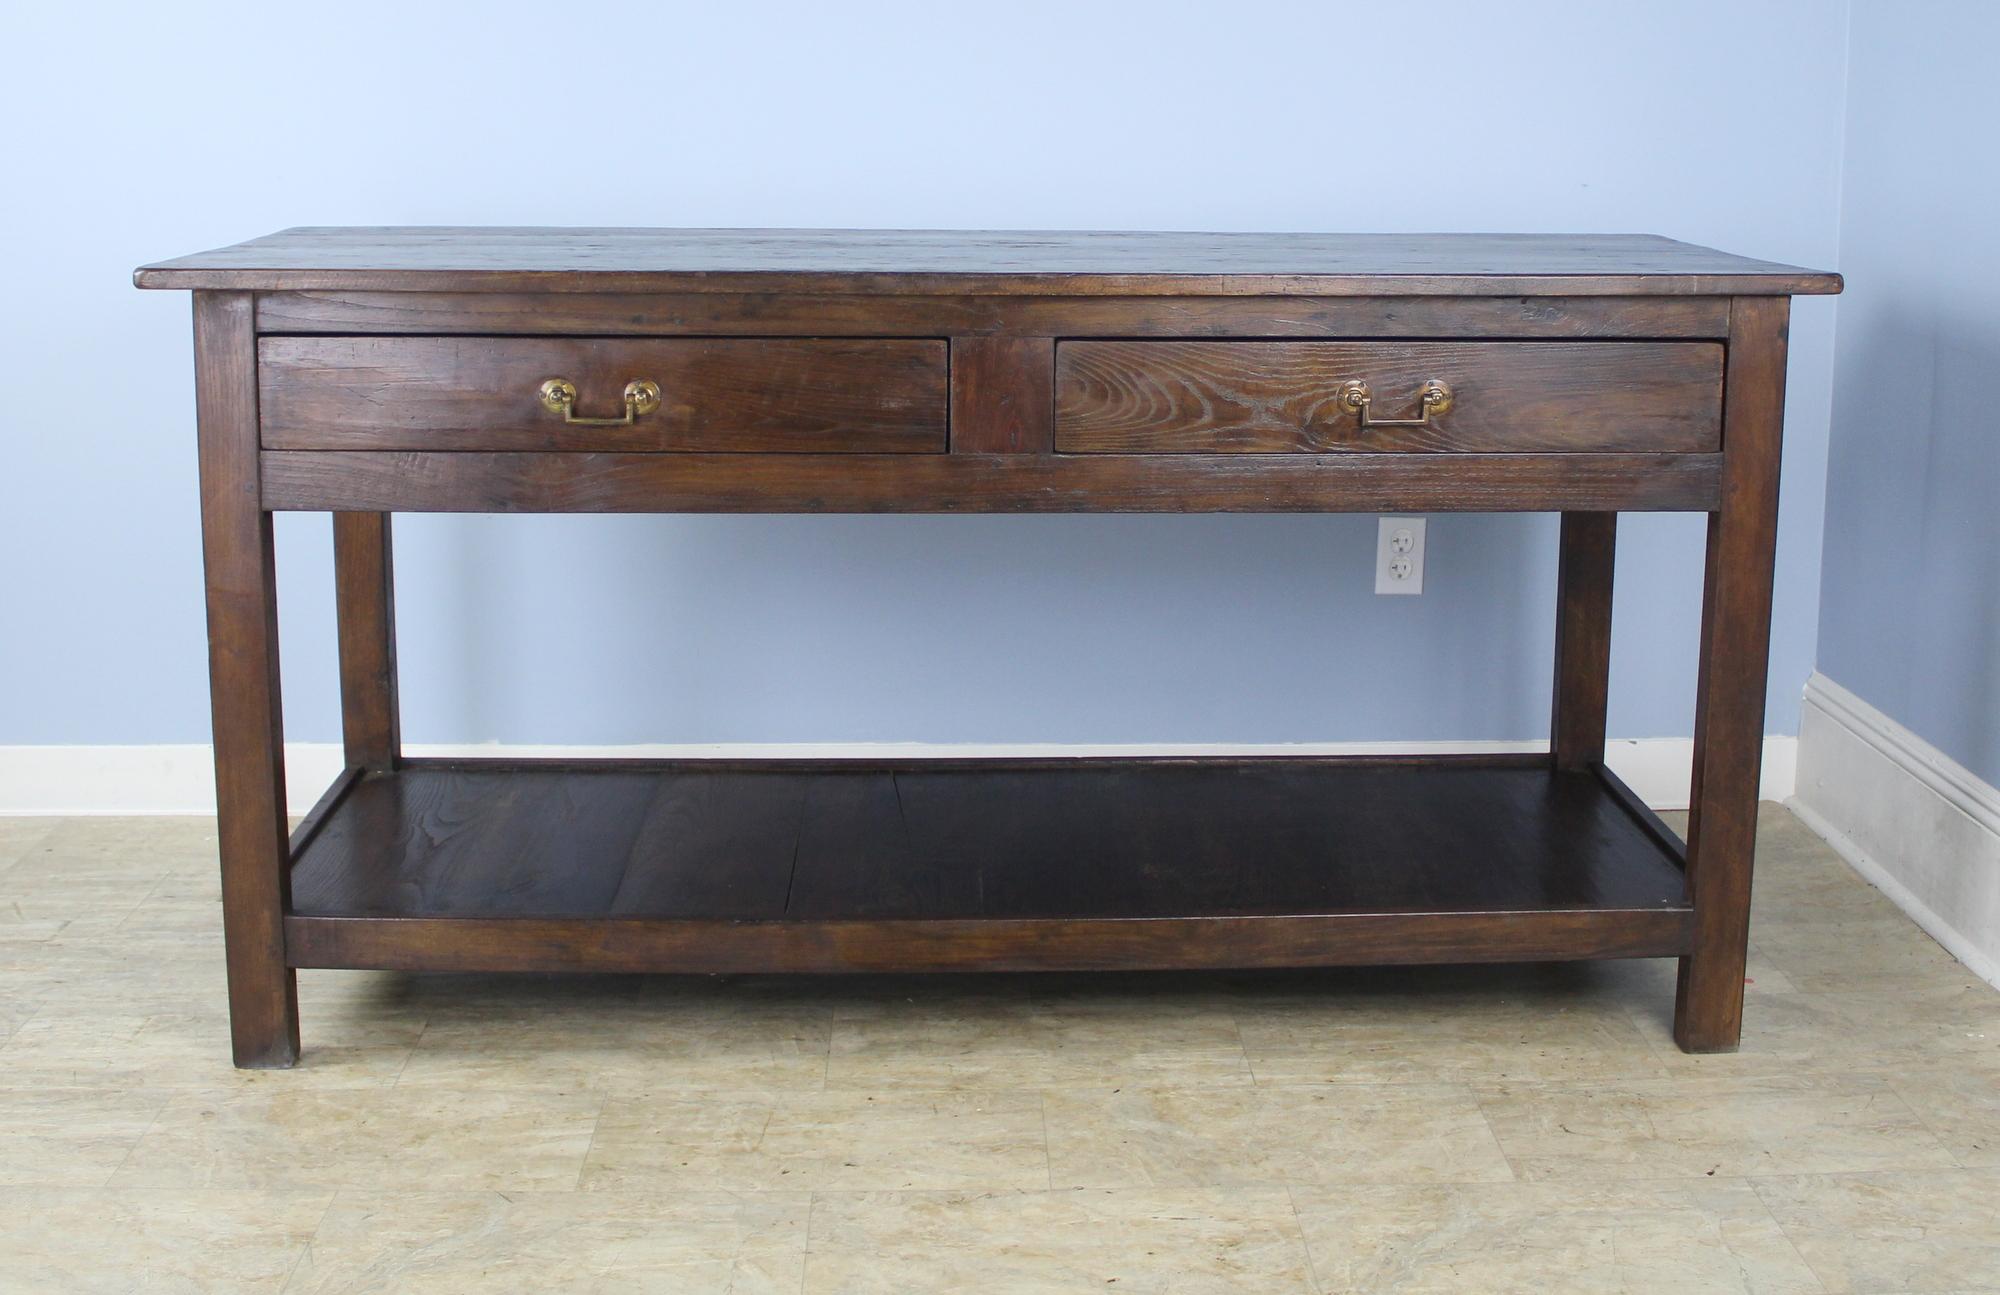 A fabulous French chestnut and fruitwood draper's table, originally for use by a tailor or seamstress. This particular one made more useful by having two drawers on either side for a similar look coming from either direction, as shown in images 2